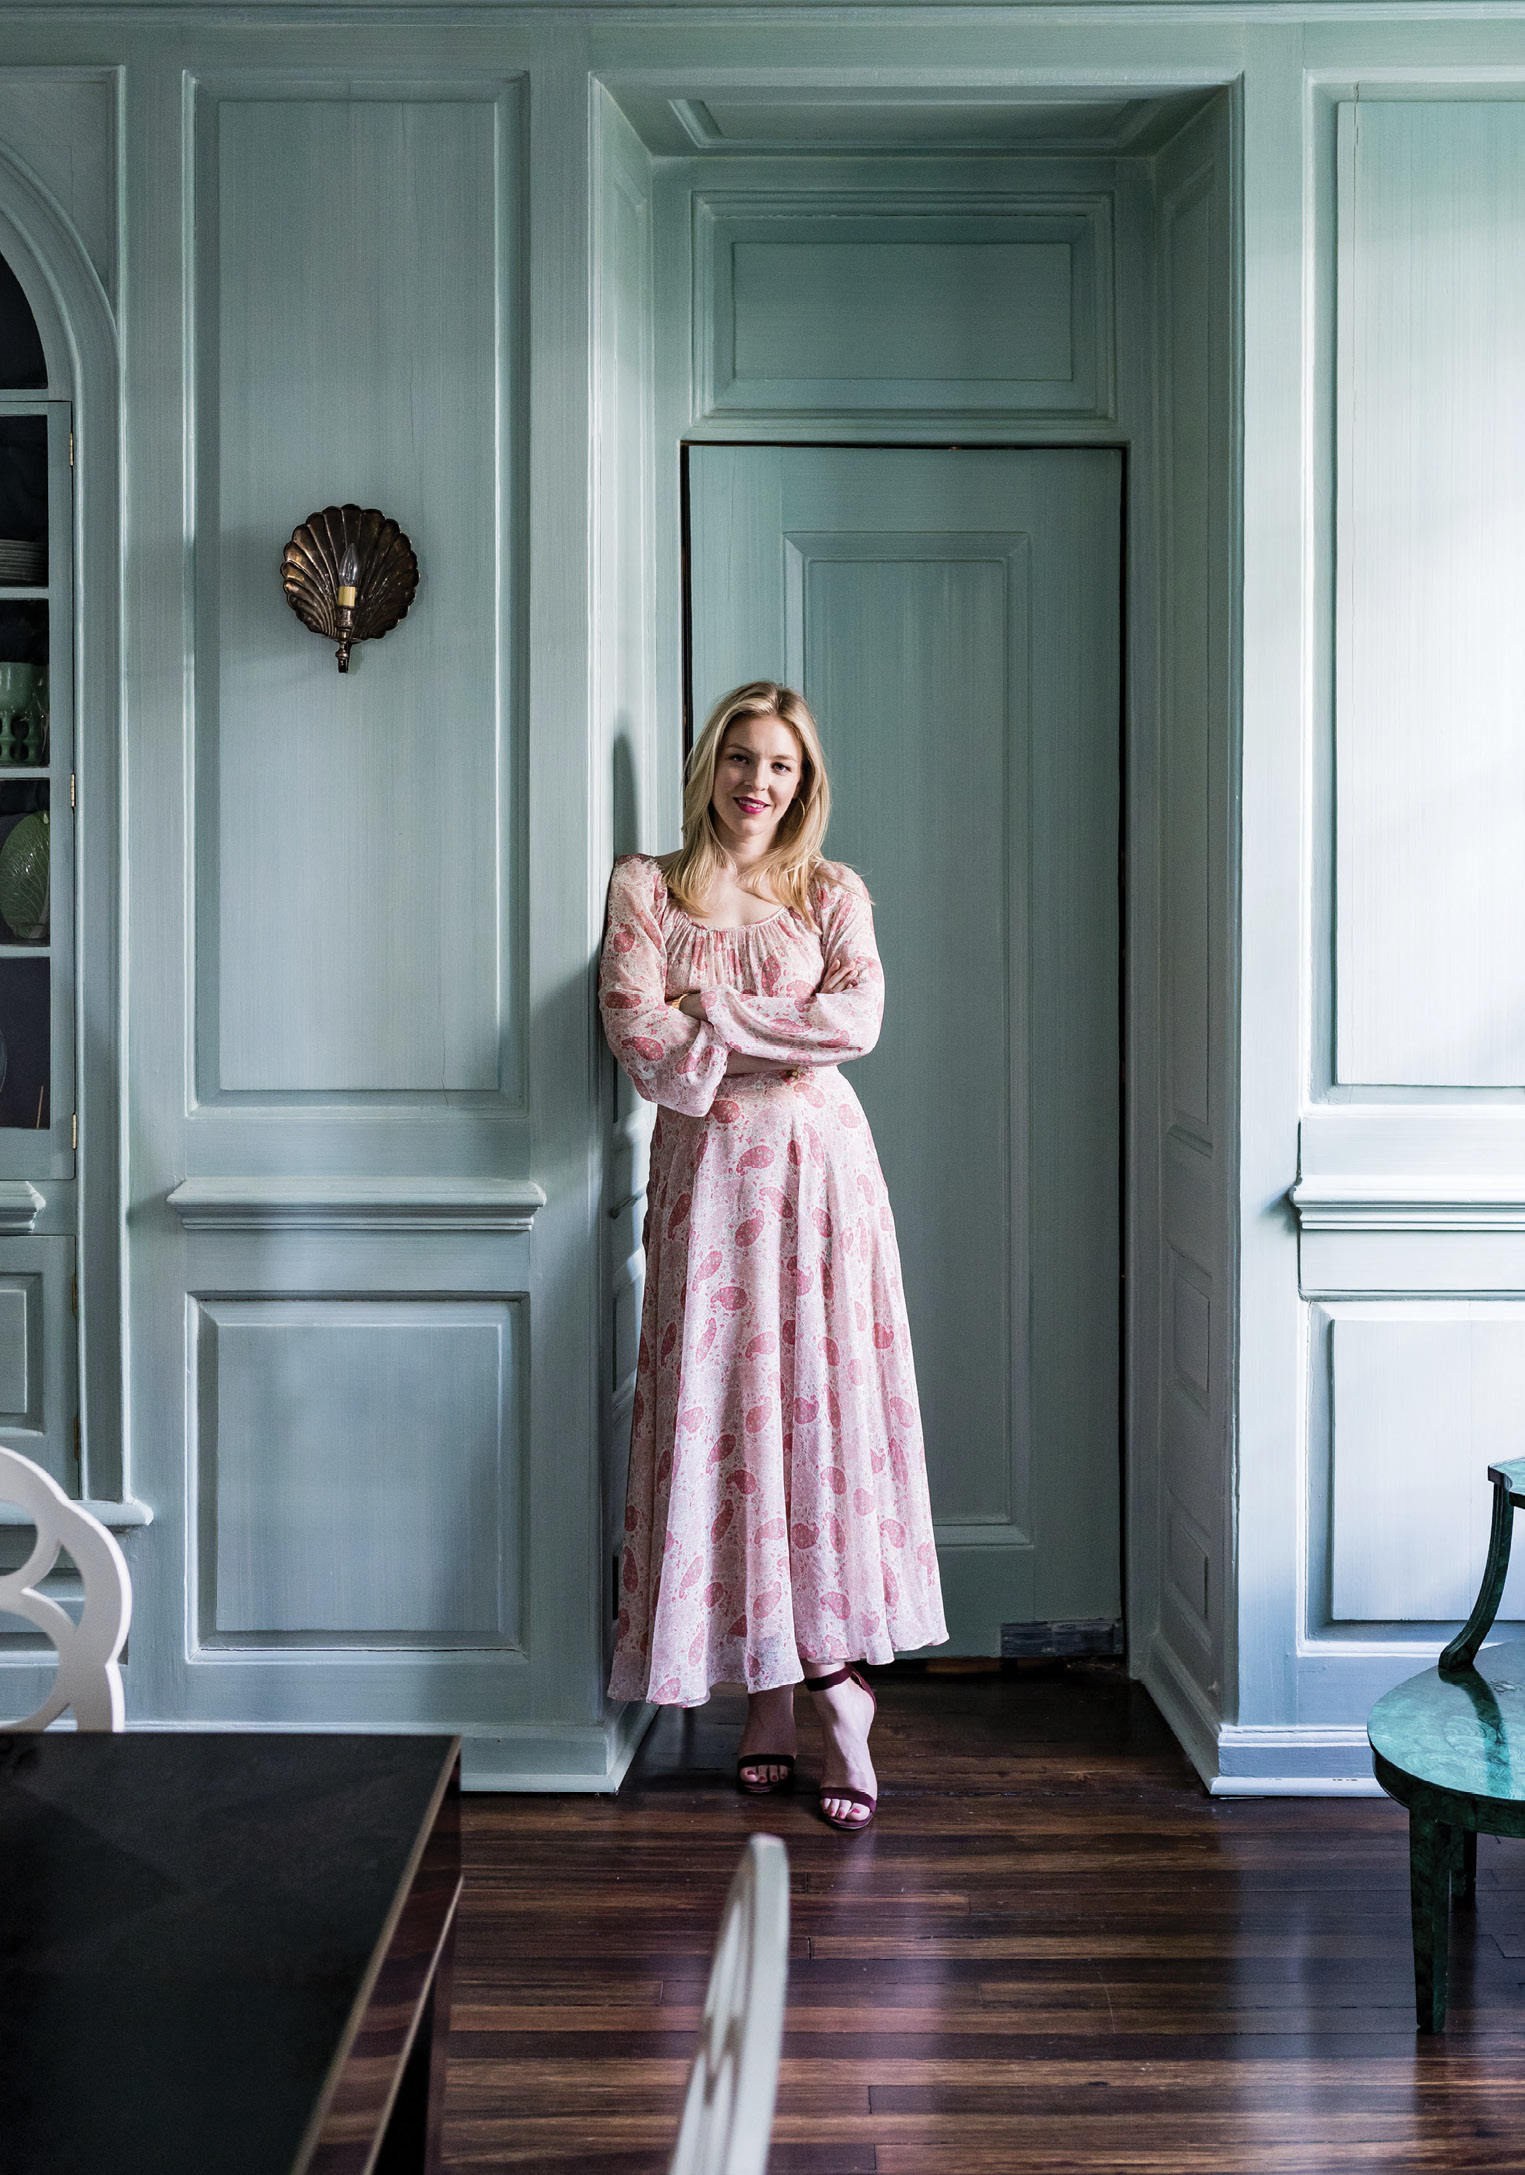 Ceara Donnelley (above in her downtown dining room) grew up visiting her grandparents’ ACE Basin property and is the only one in the family to make Charleston her home base. Donnelley’s full renovation of her historic home served as a design lab for Ceara Donnelley Ltd., her interior design studio.